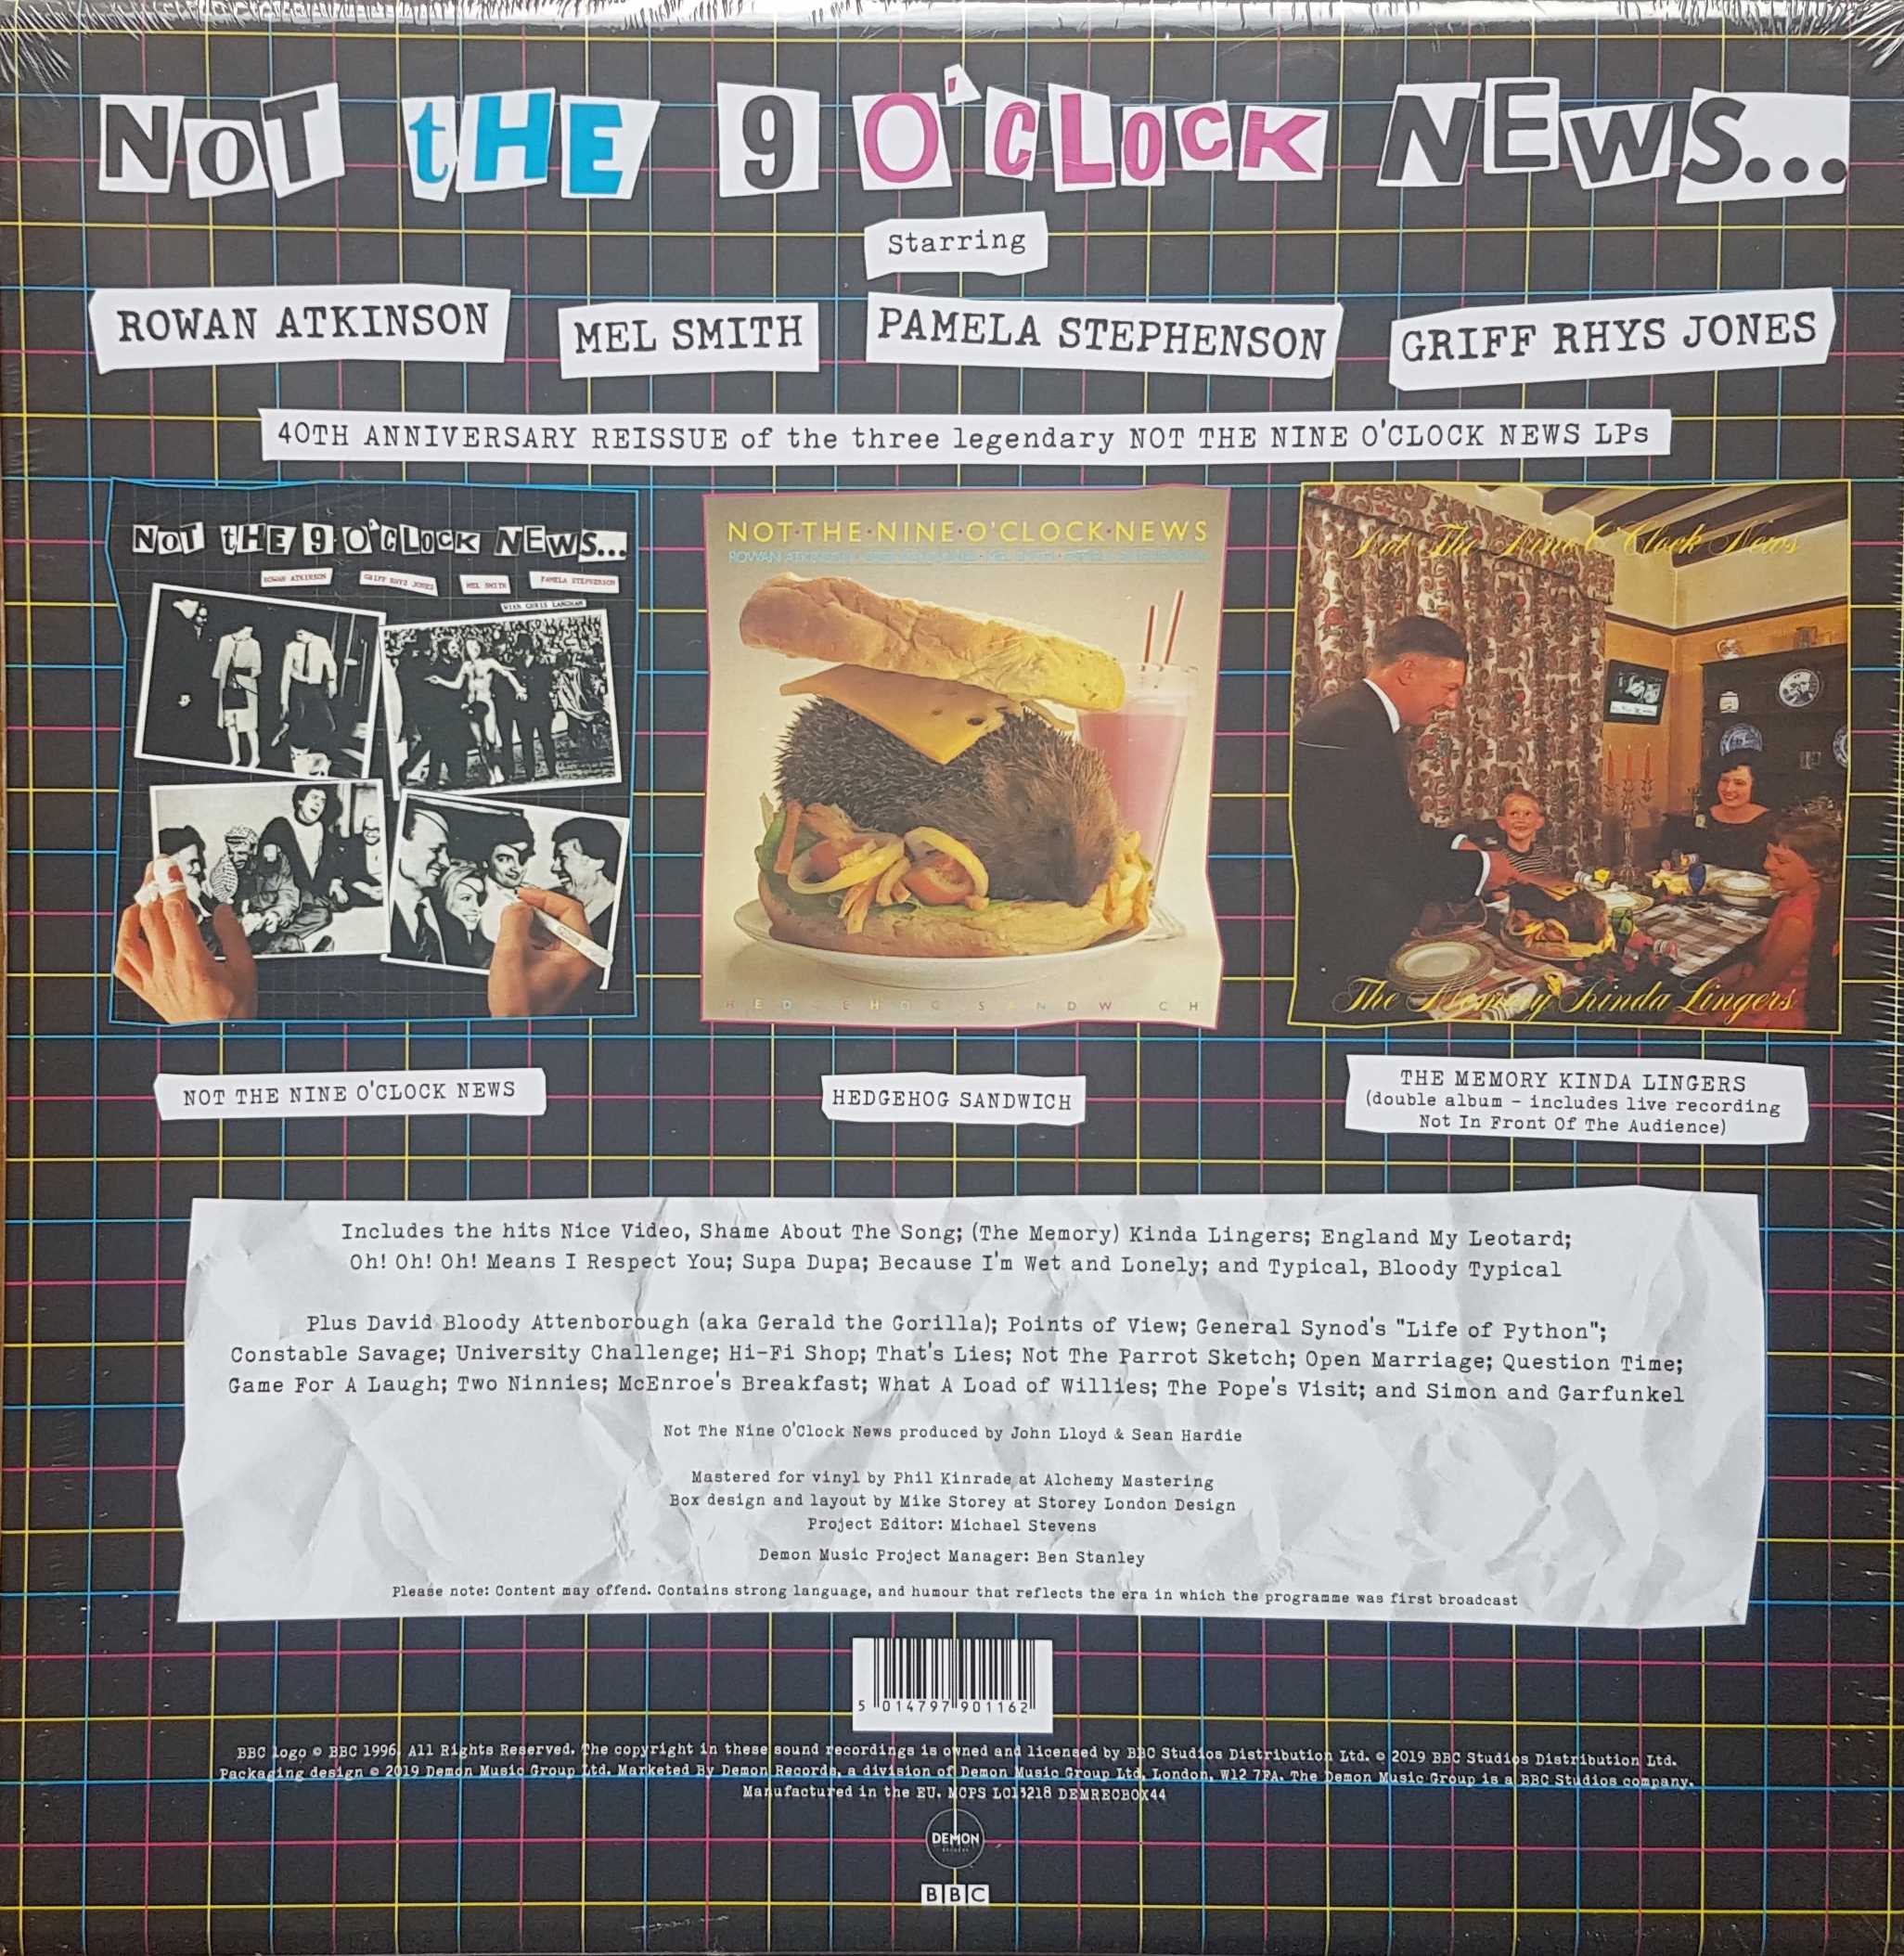 Picture of DEMRECBOX44 Not the nine o'clock news - Not all the albums again by artist Rowan Atkinson / Mel Smith / Pamela Stephenson / Griff Rhys Jones from the BBC records and Tapes library